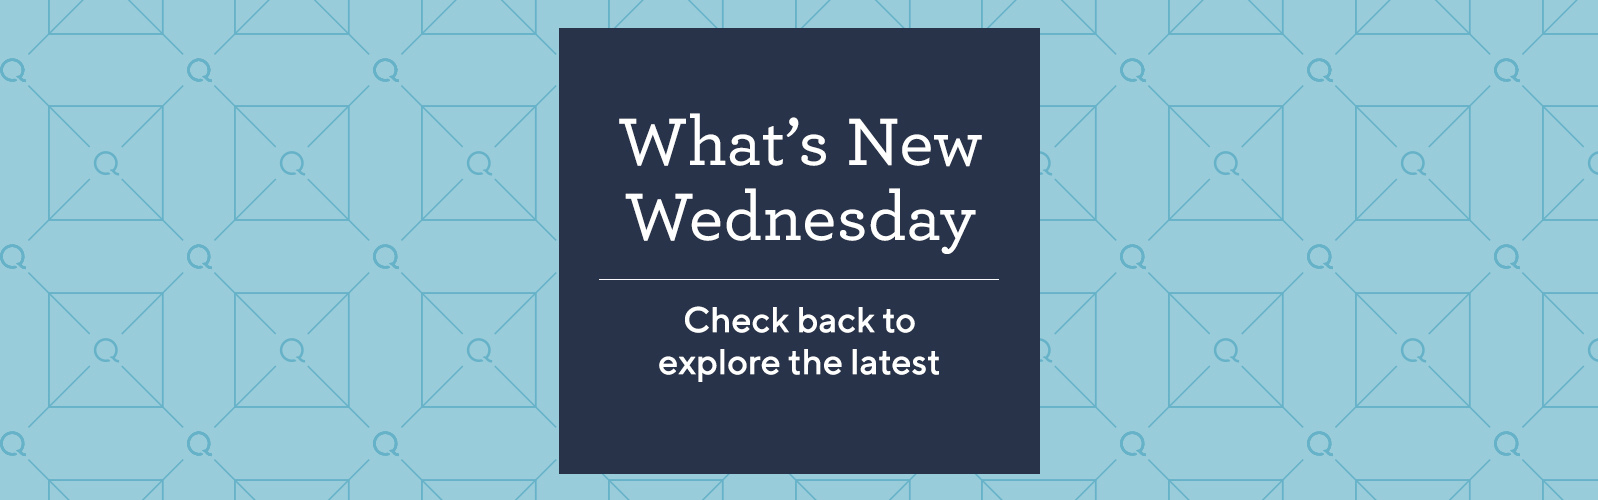 What's New Wednesday.  Check back to explore the latest